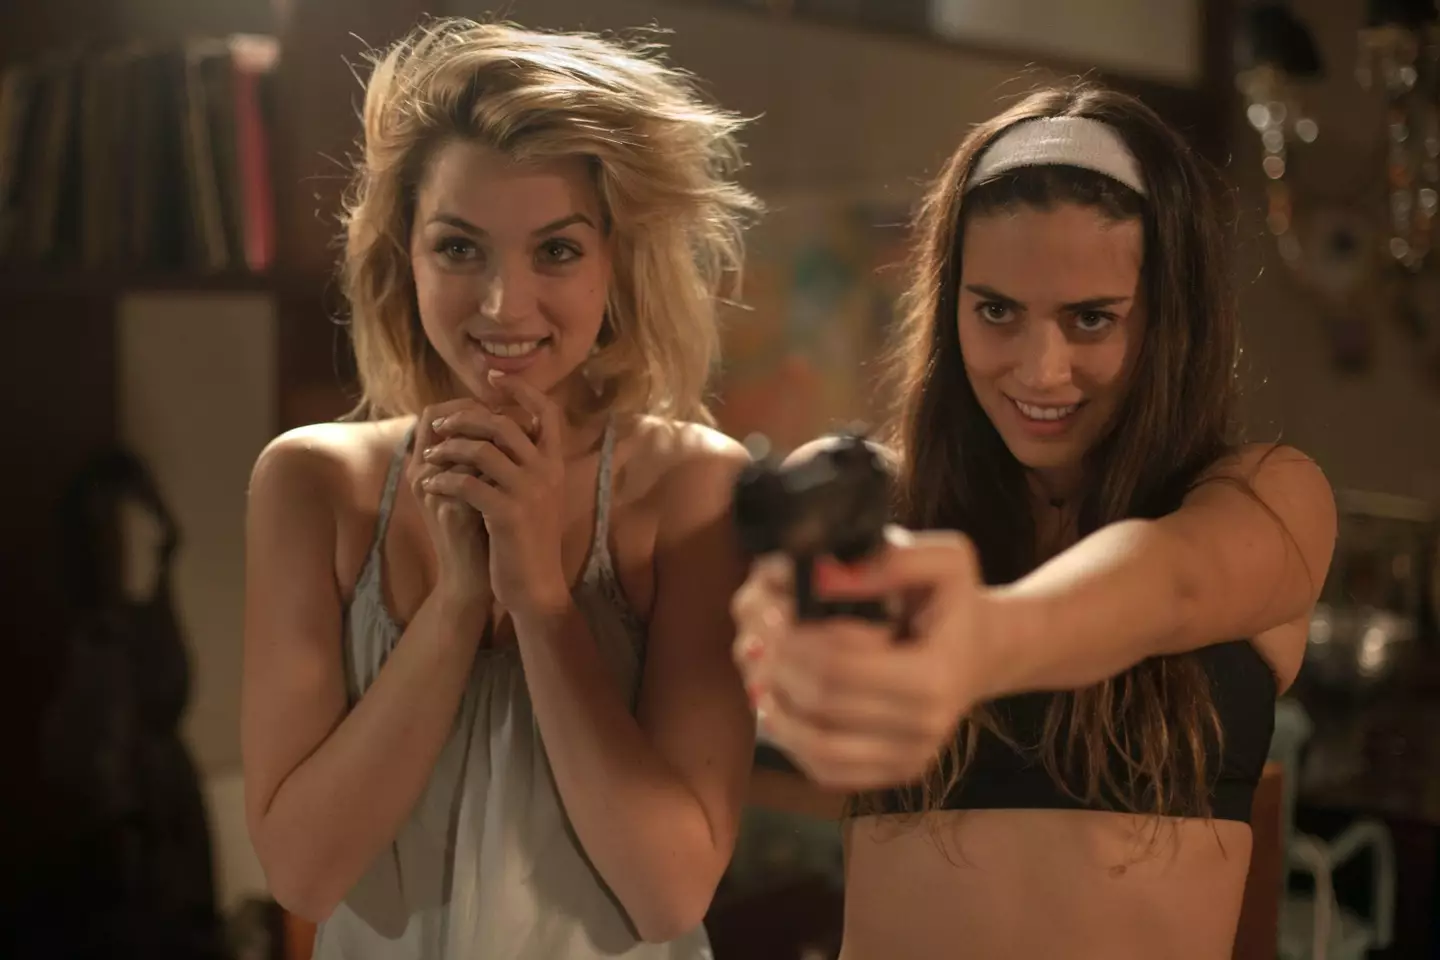 Lorenza Izzo and Ana de Armas star as the deadly strangers in the 2015 film.